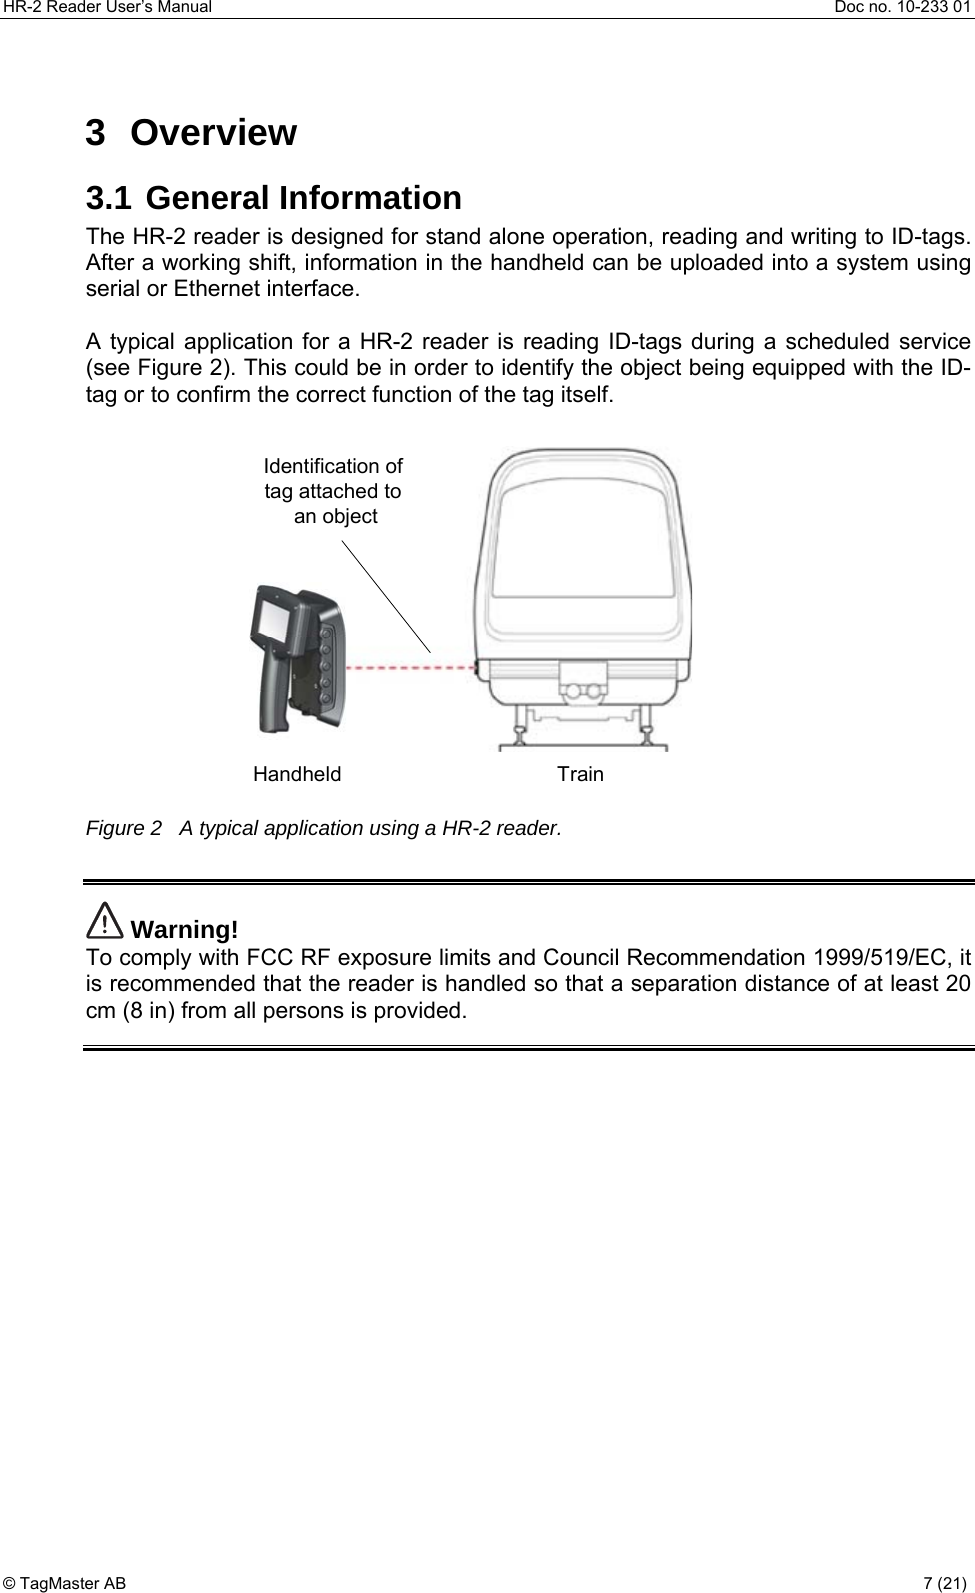 HR-2 Reader User’s Manual  Doc no. 10-233 01 © TagMaster AB  7 (21)   3 Overview 3.1 General Information The HR-2 reader is designed for stand alone operation, reading and writing to ID-tags. After a working shift, information in the handheld can be uploaded into a system using serial or Ethernet interface.  A typical application for a HR-2 reader is reading ID-tags during a scheduled service (see Figure 2). This could be in order to identify the object being equipped with the ID-tag or to confirm the correct function of the tag itself.  HandheldIdentification of tag attached to an objectTrain Figure 2   A typical application using a HR-2 reader.   Warning! To comply with FCC RF exposure limits and Council Recommendation 1999/519/EC, it is recommended that the reader is handled so that a separation distance of at least 20 cm (8 in) from all persons is provided.   